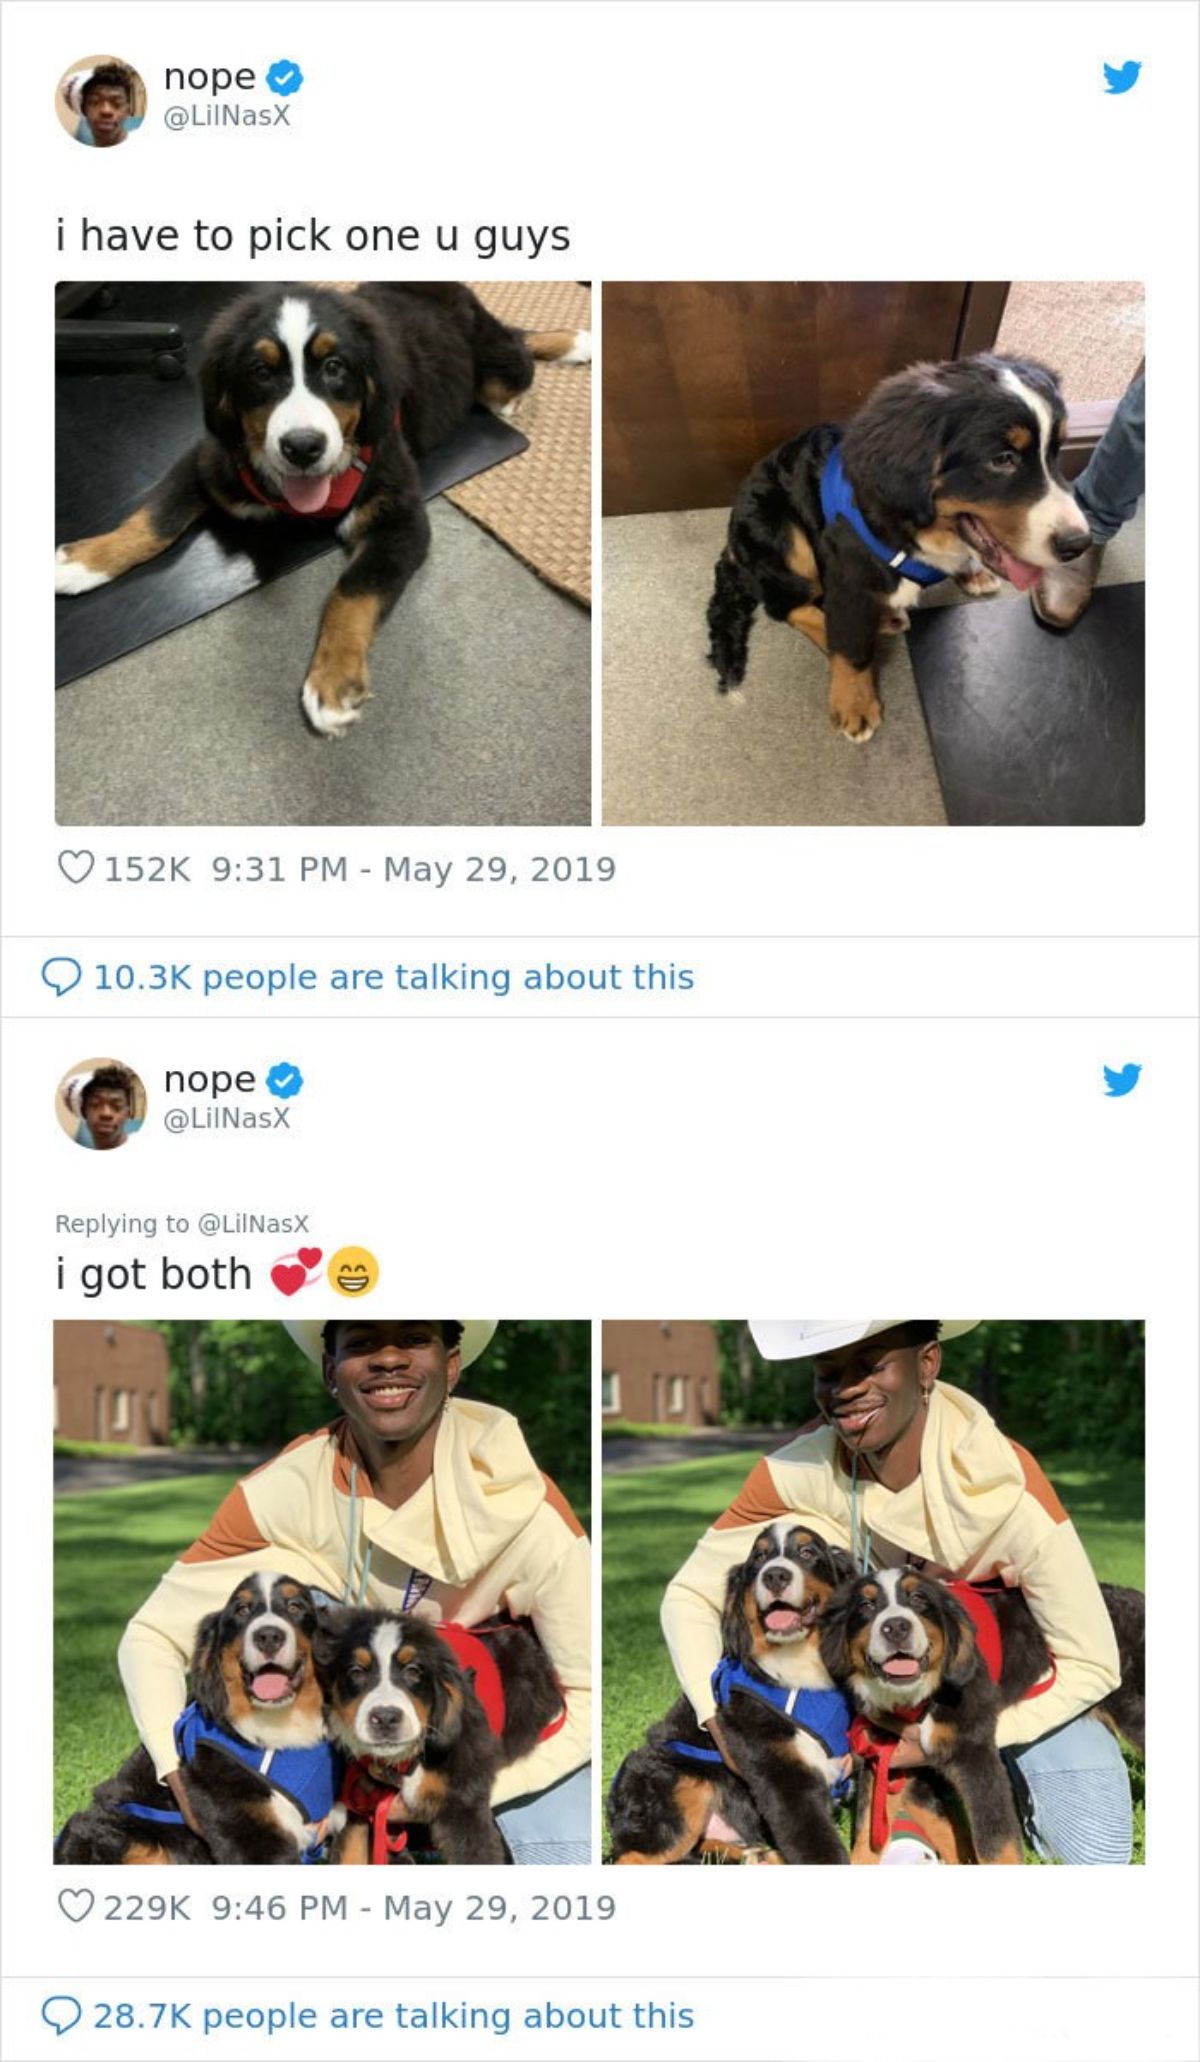 1 tweet of 2 st bernard puppies saying i have to pick one and 1 tweet saying i got both with lil nas x posing with both puppies